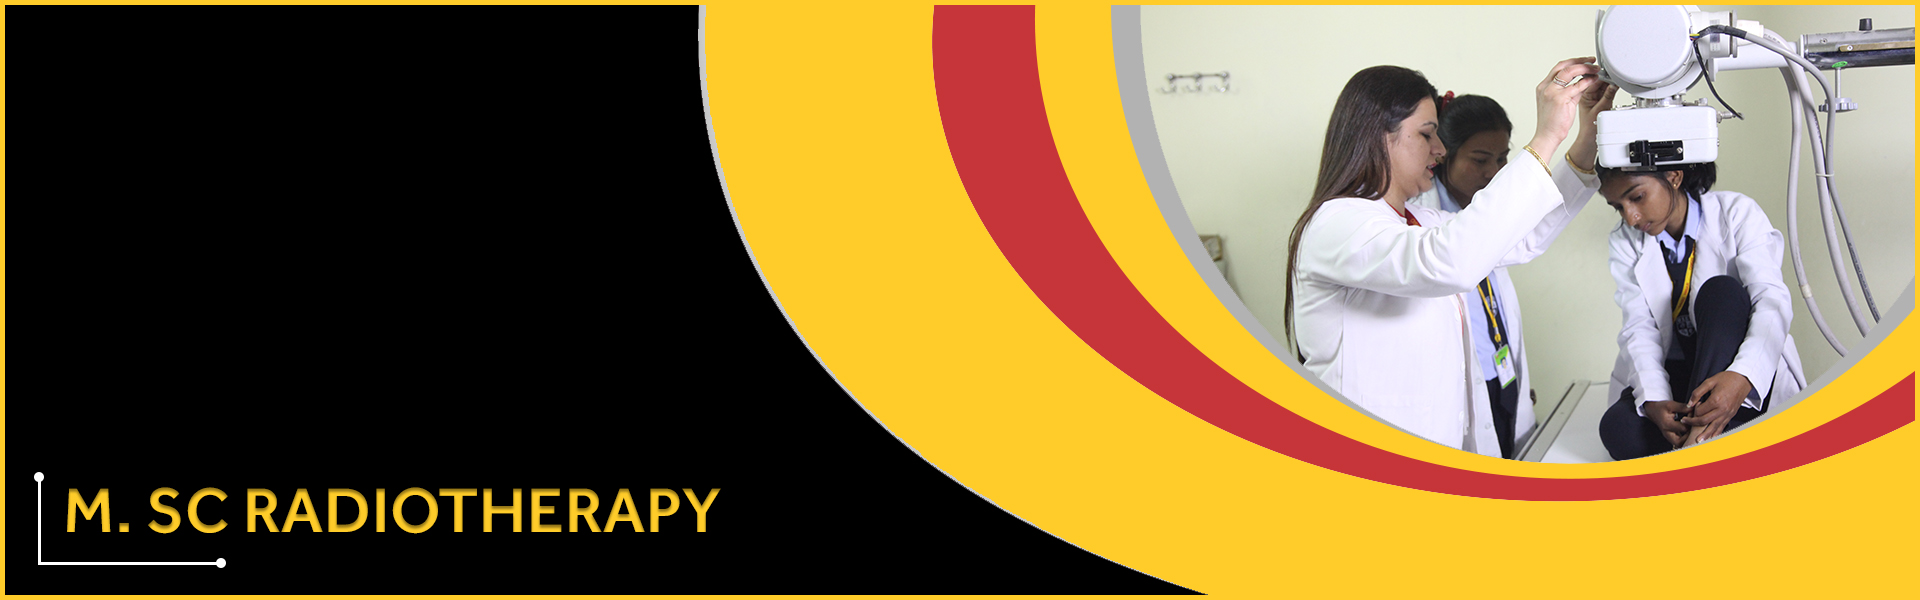 Masters Radiotherapy Technology Course/College in Haryana, India